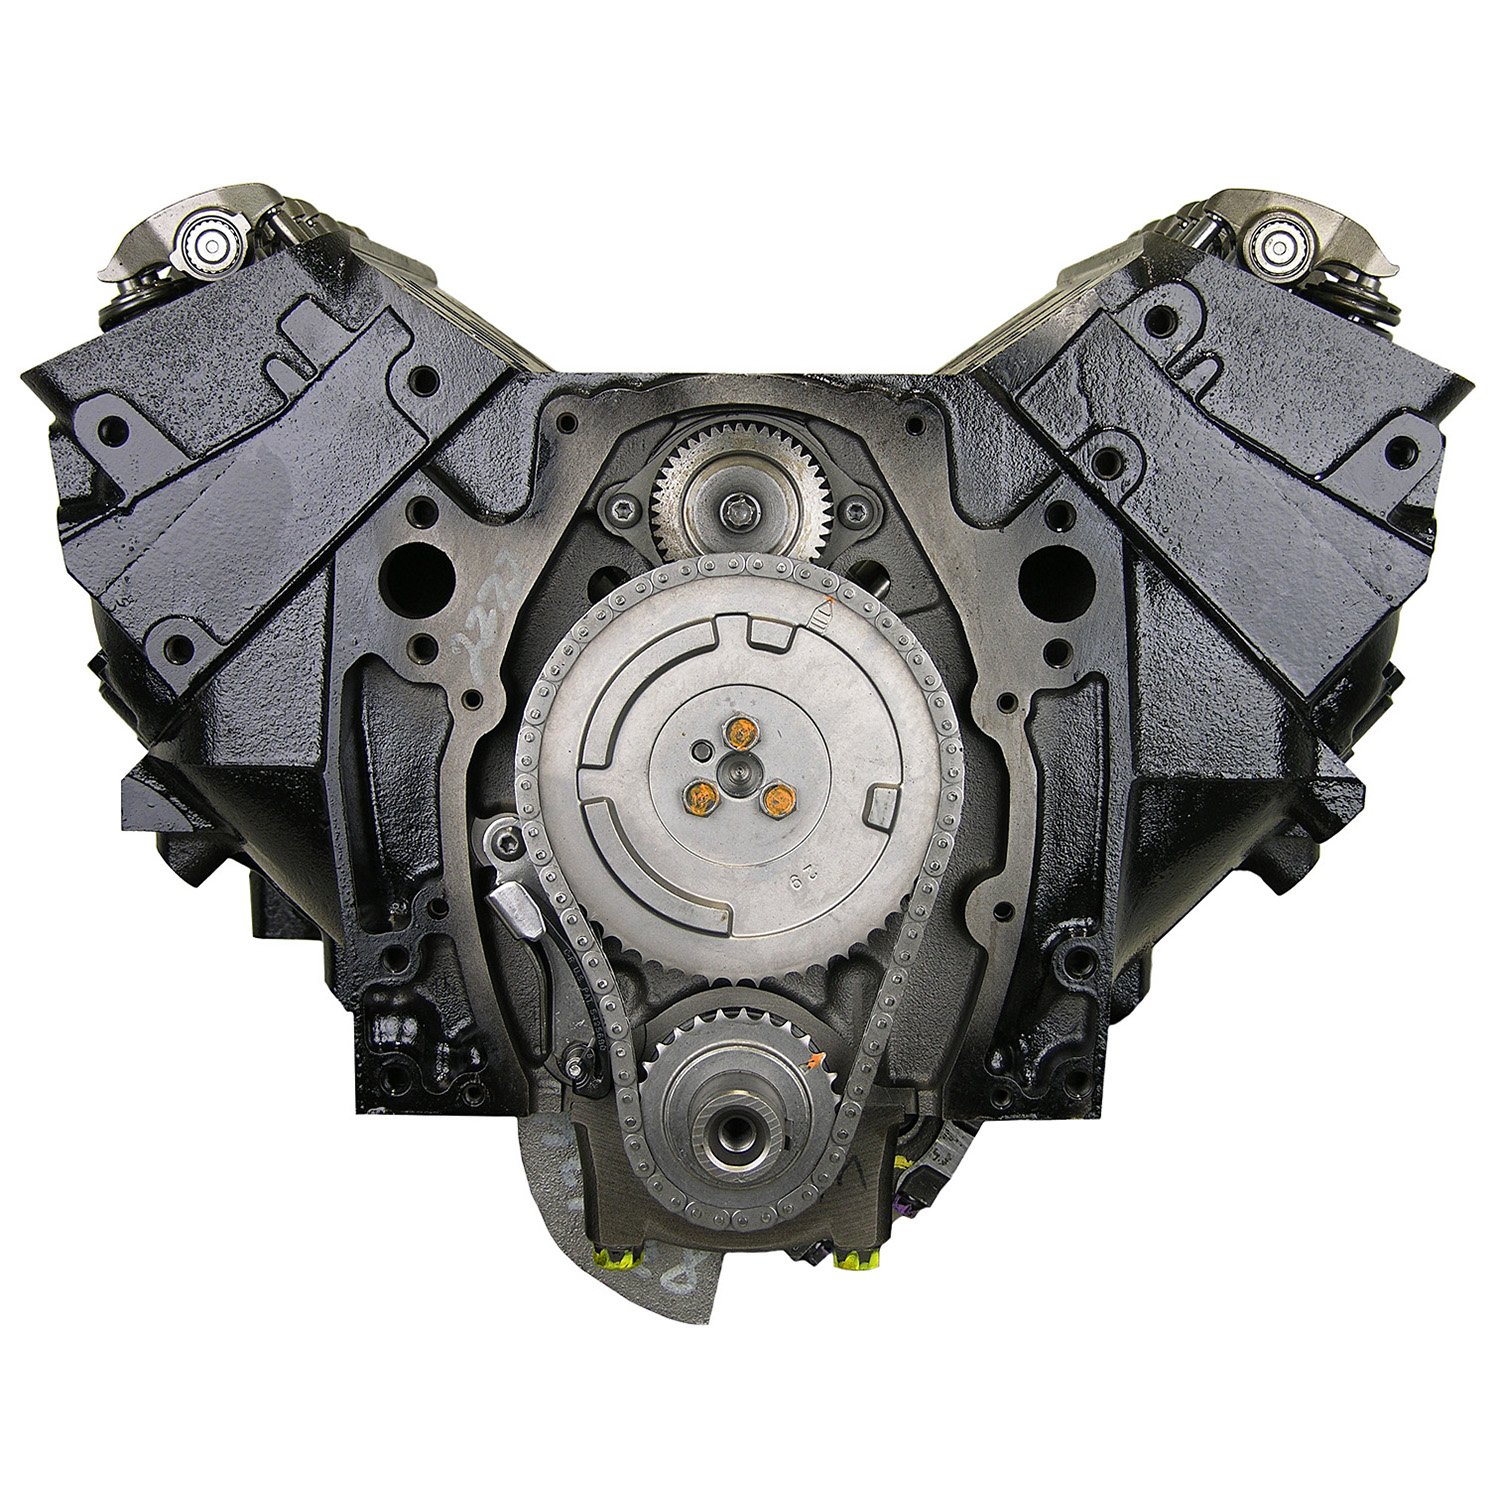 Remanufactured Crate Engine for 2007-2014 Chevy/GMC Truck &